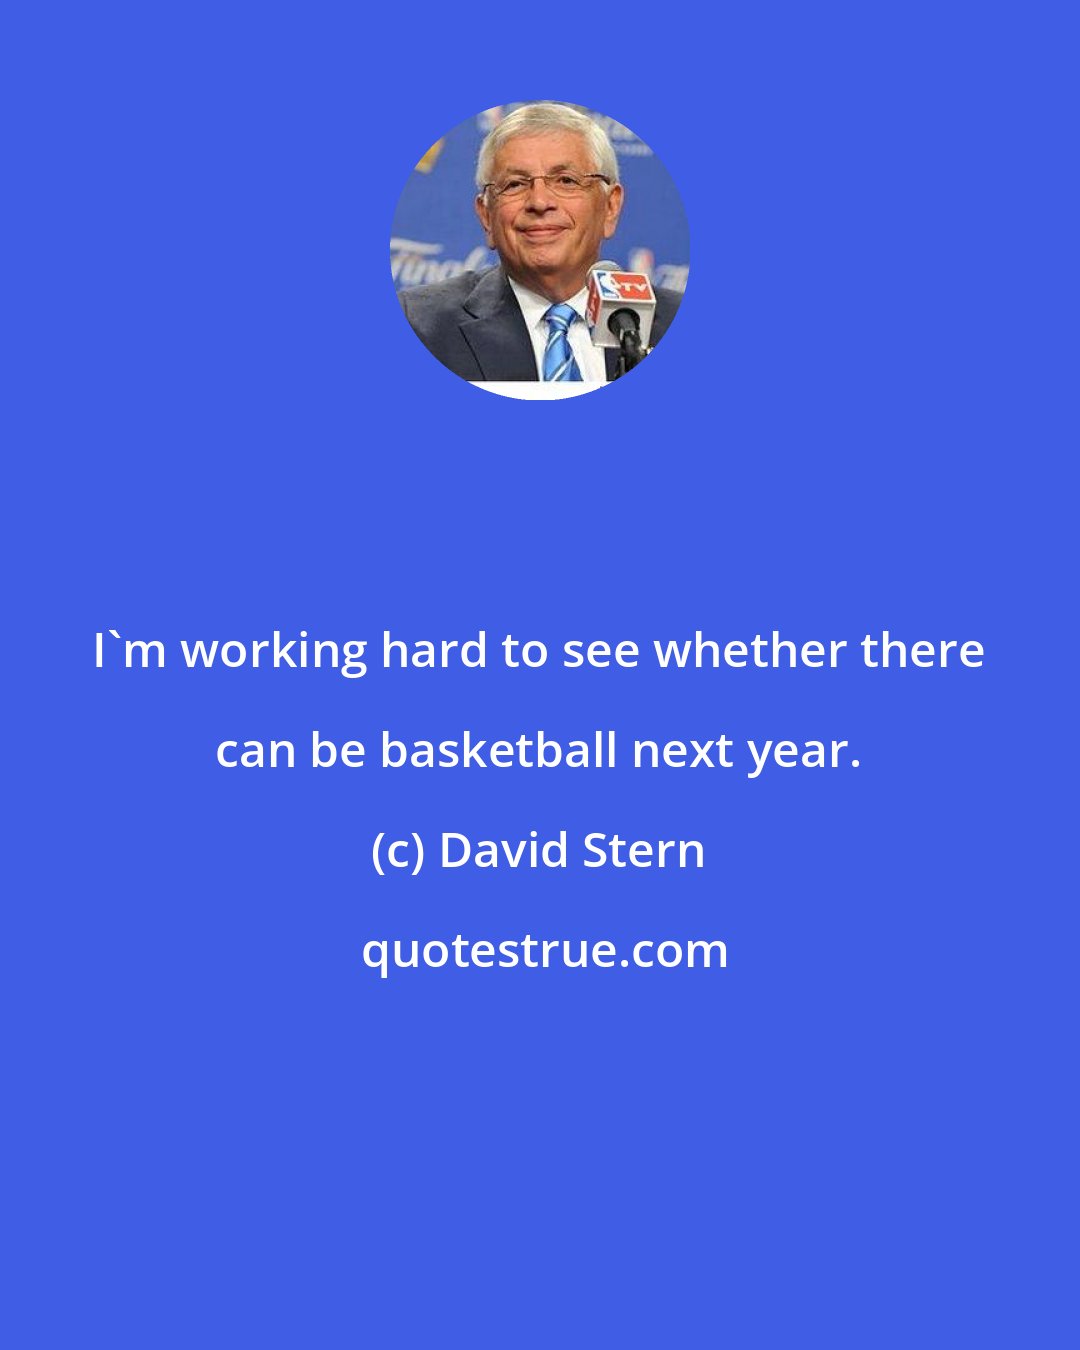 David Stern: I'm working hard to see whether there can be basketball next year.